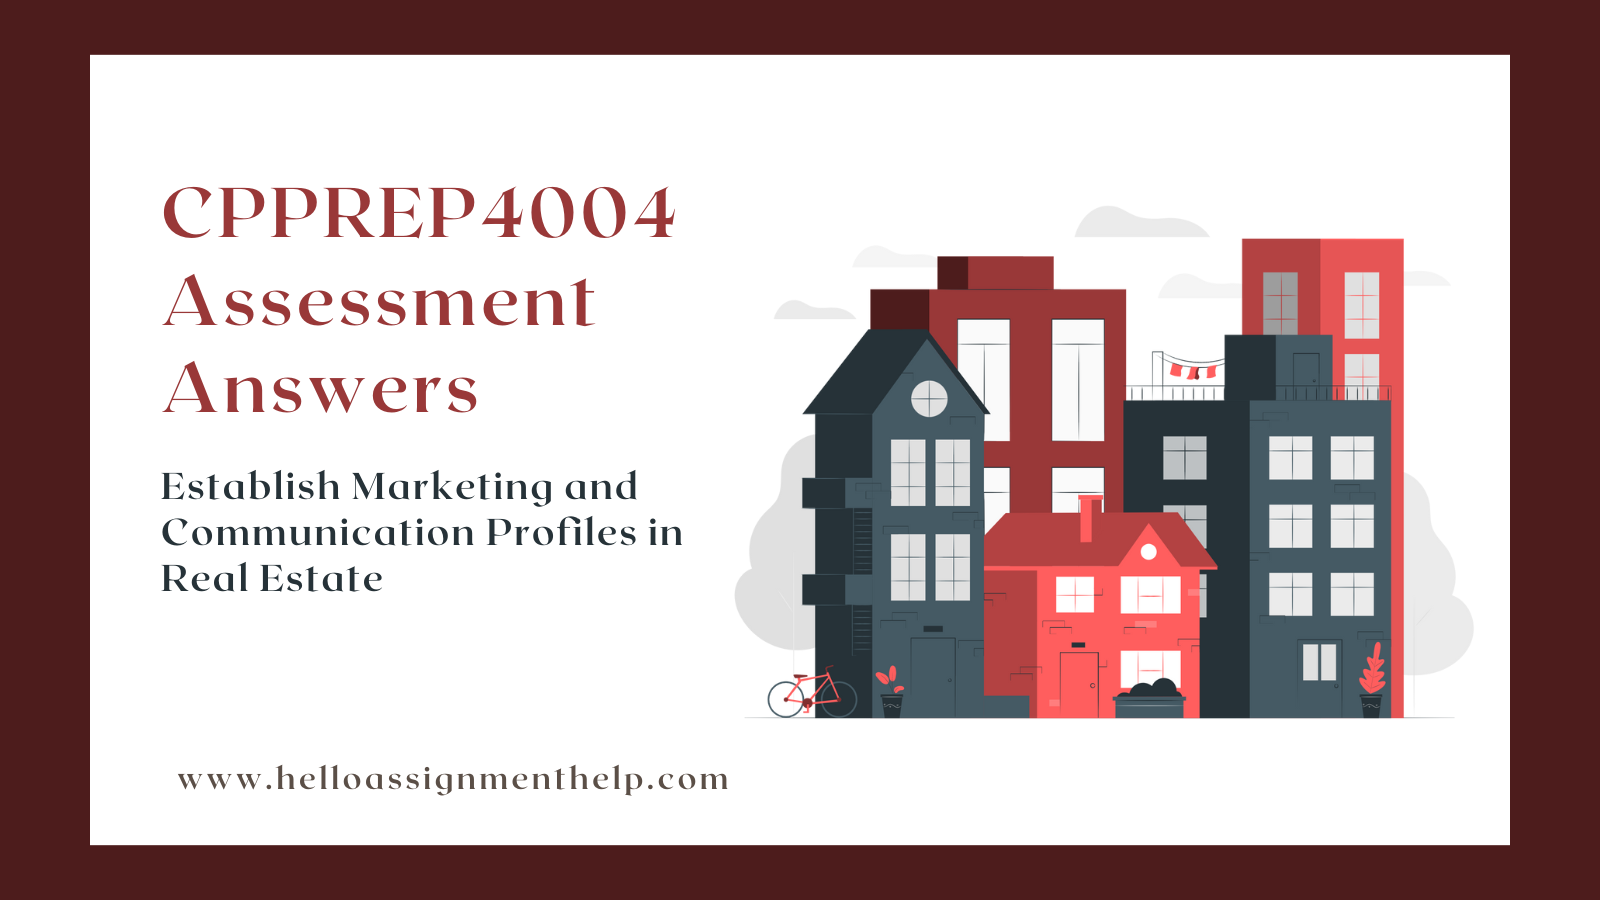 CPPREP4004 Assessment Answers